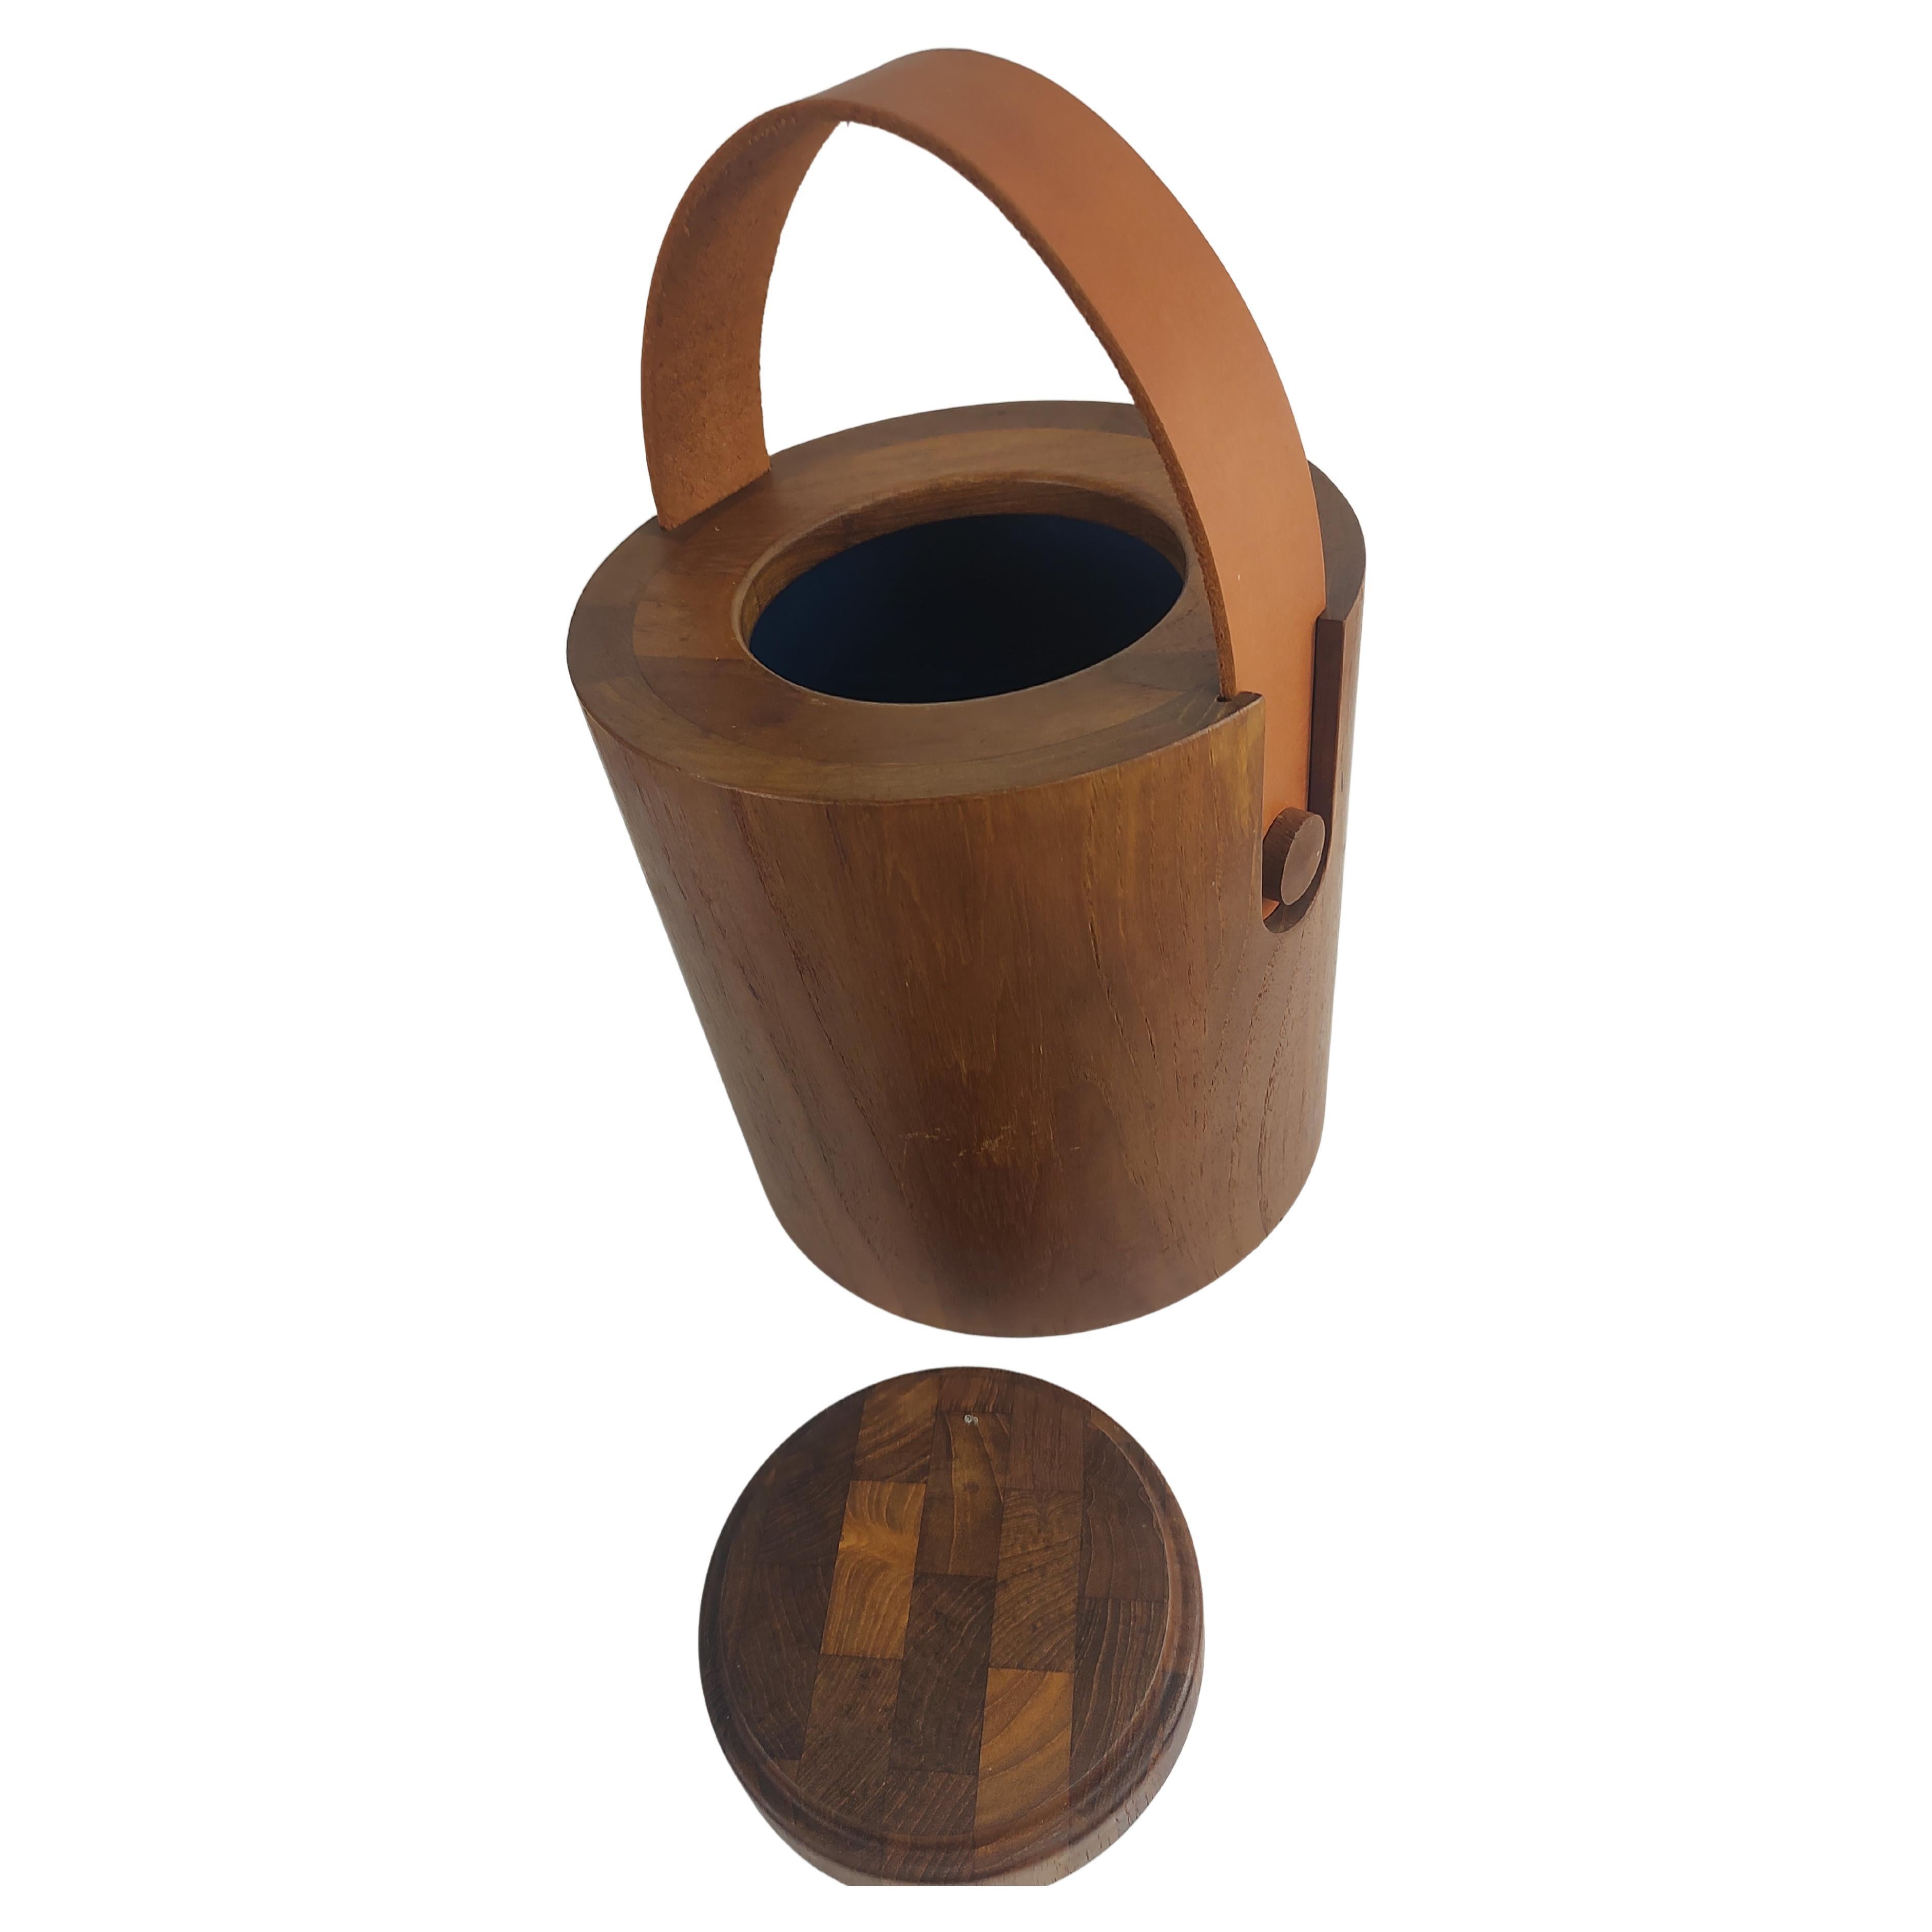 Fabulous simple and elegant teak ice bucket by Nessen with a thick rigid new leather strap handle. Plastic liner with a lift off lid in excellent vintage condition with minimal wear. Signed on base see pics.